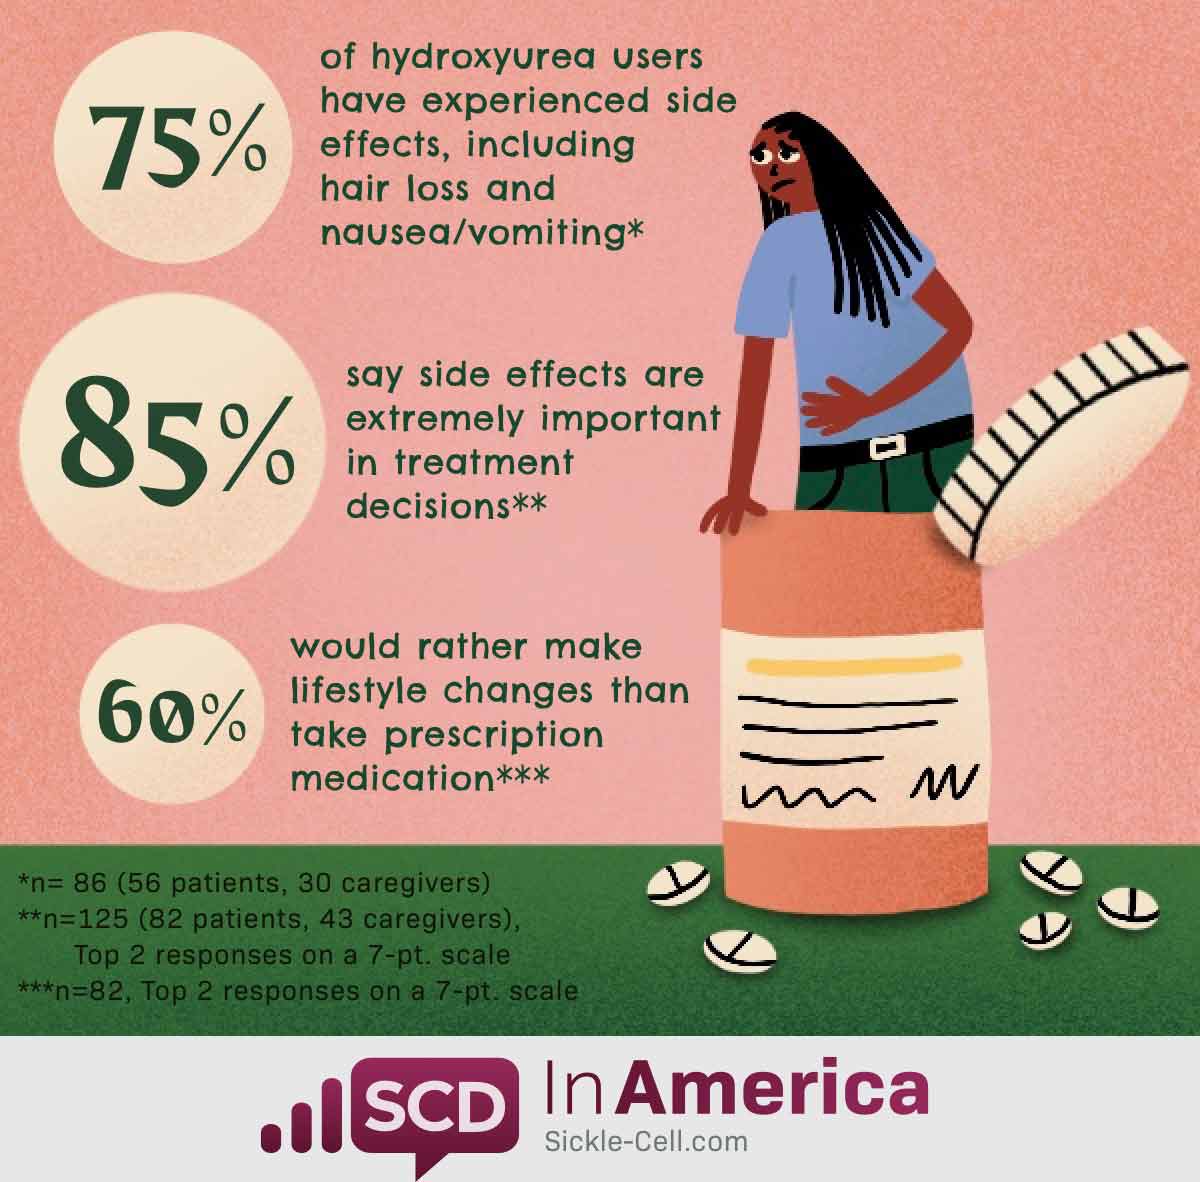 Person standing in a pill bottle holding her stomach and appearing in pain. Statistics shown: 75% of hydroxyurea users have experienced side effects, including hair loss and nausea/vomiting, 85% say side effects are extremely important in treatment decisions, 60% of respondents would rather make lifestyle changes than take prescription medication.